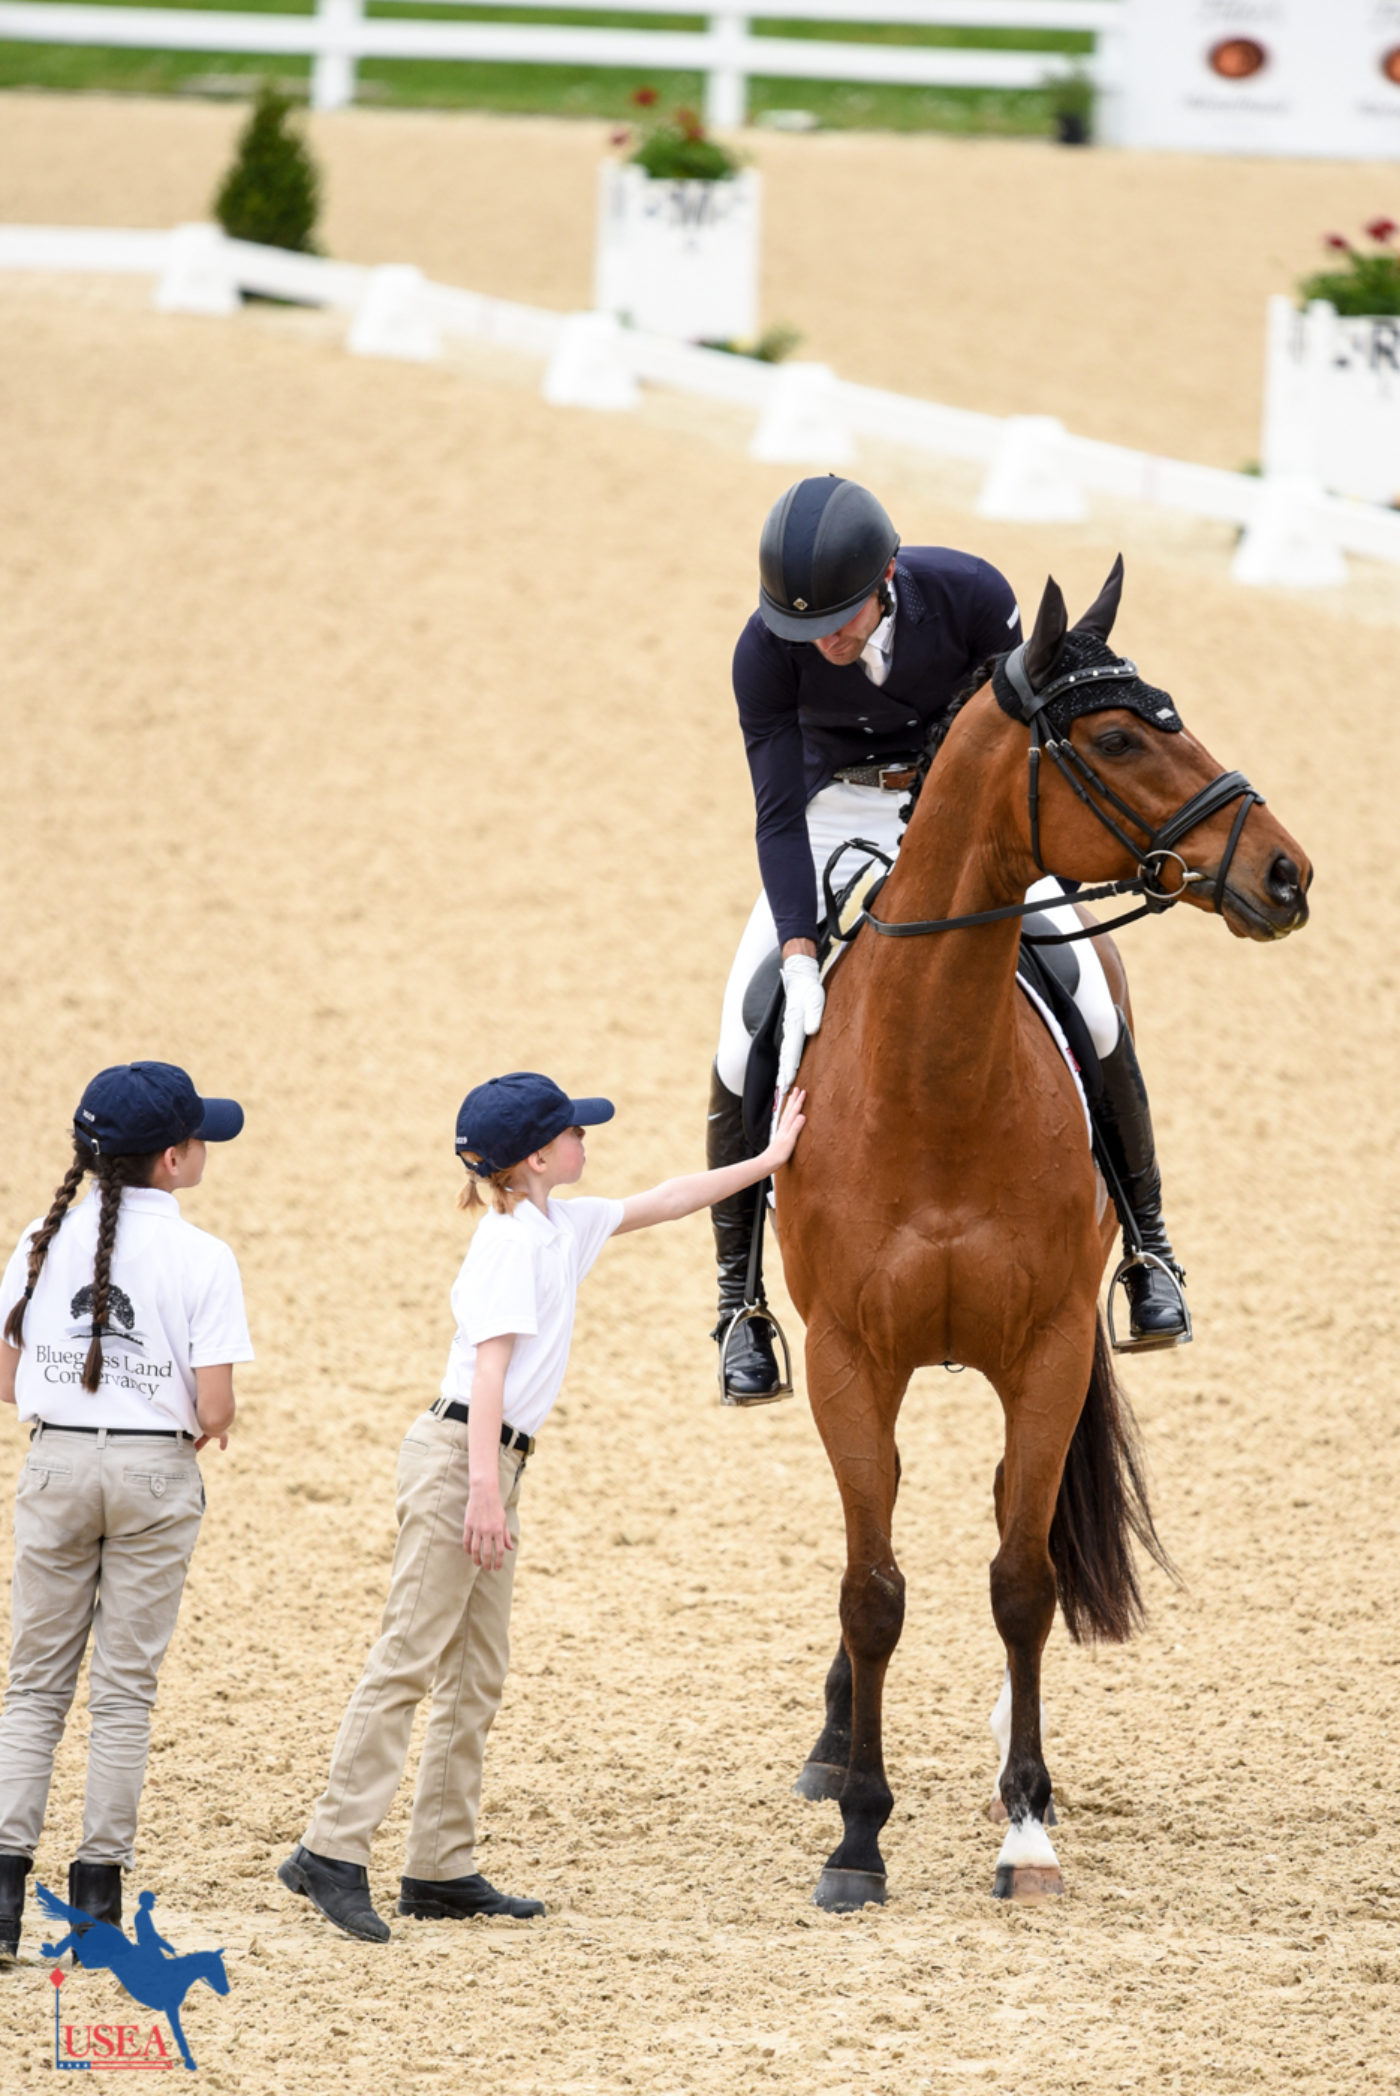 The Pony Club volunteers got to say hi to Unmarked Bills after his test. USEA/Leslie Mintz Photo.